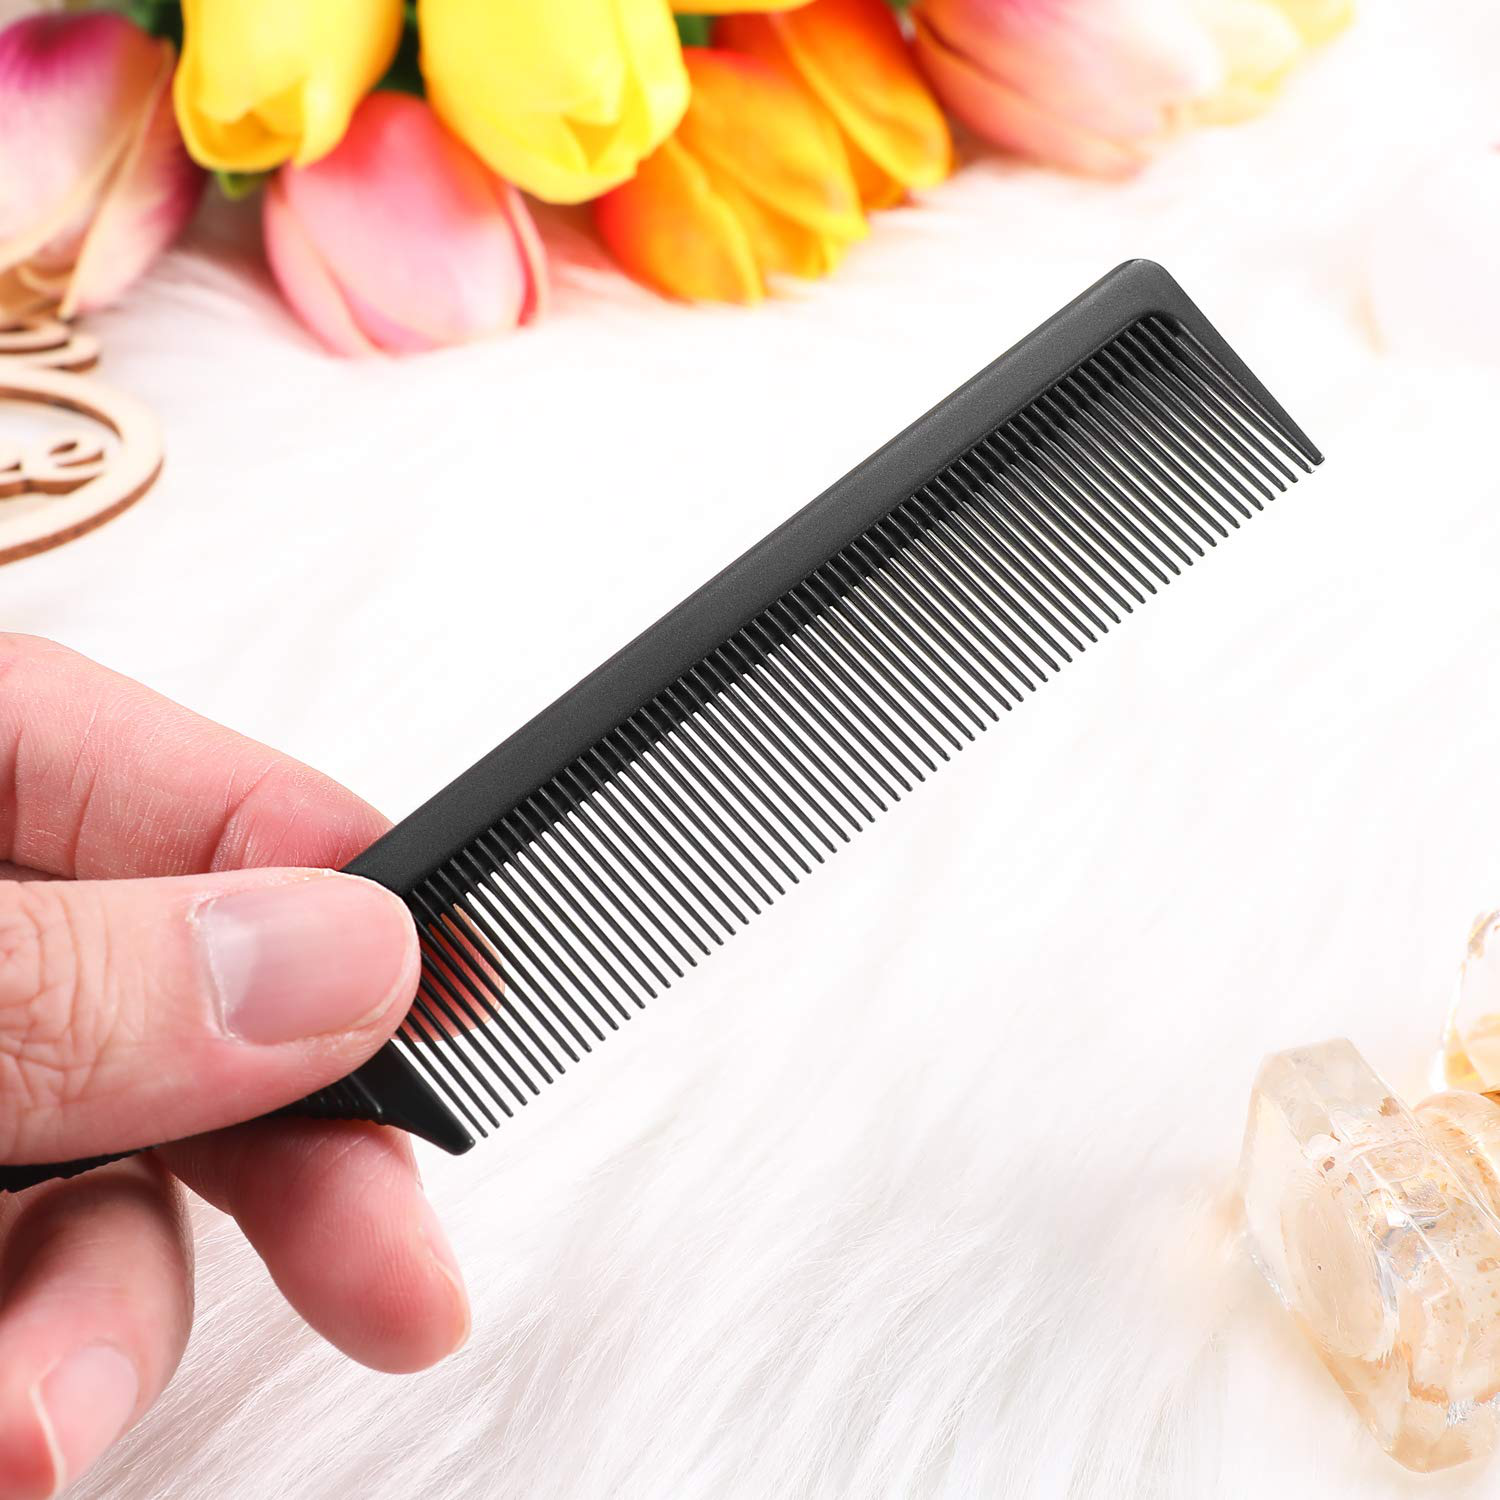 3 Packs Rat Tail Comb Steel Pin Rat Tail Carbon Fiber Heat Resistant Teasing Combs with Stainless Steel Pintail